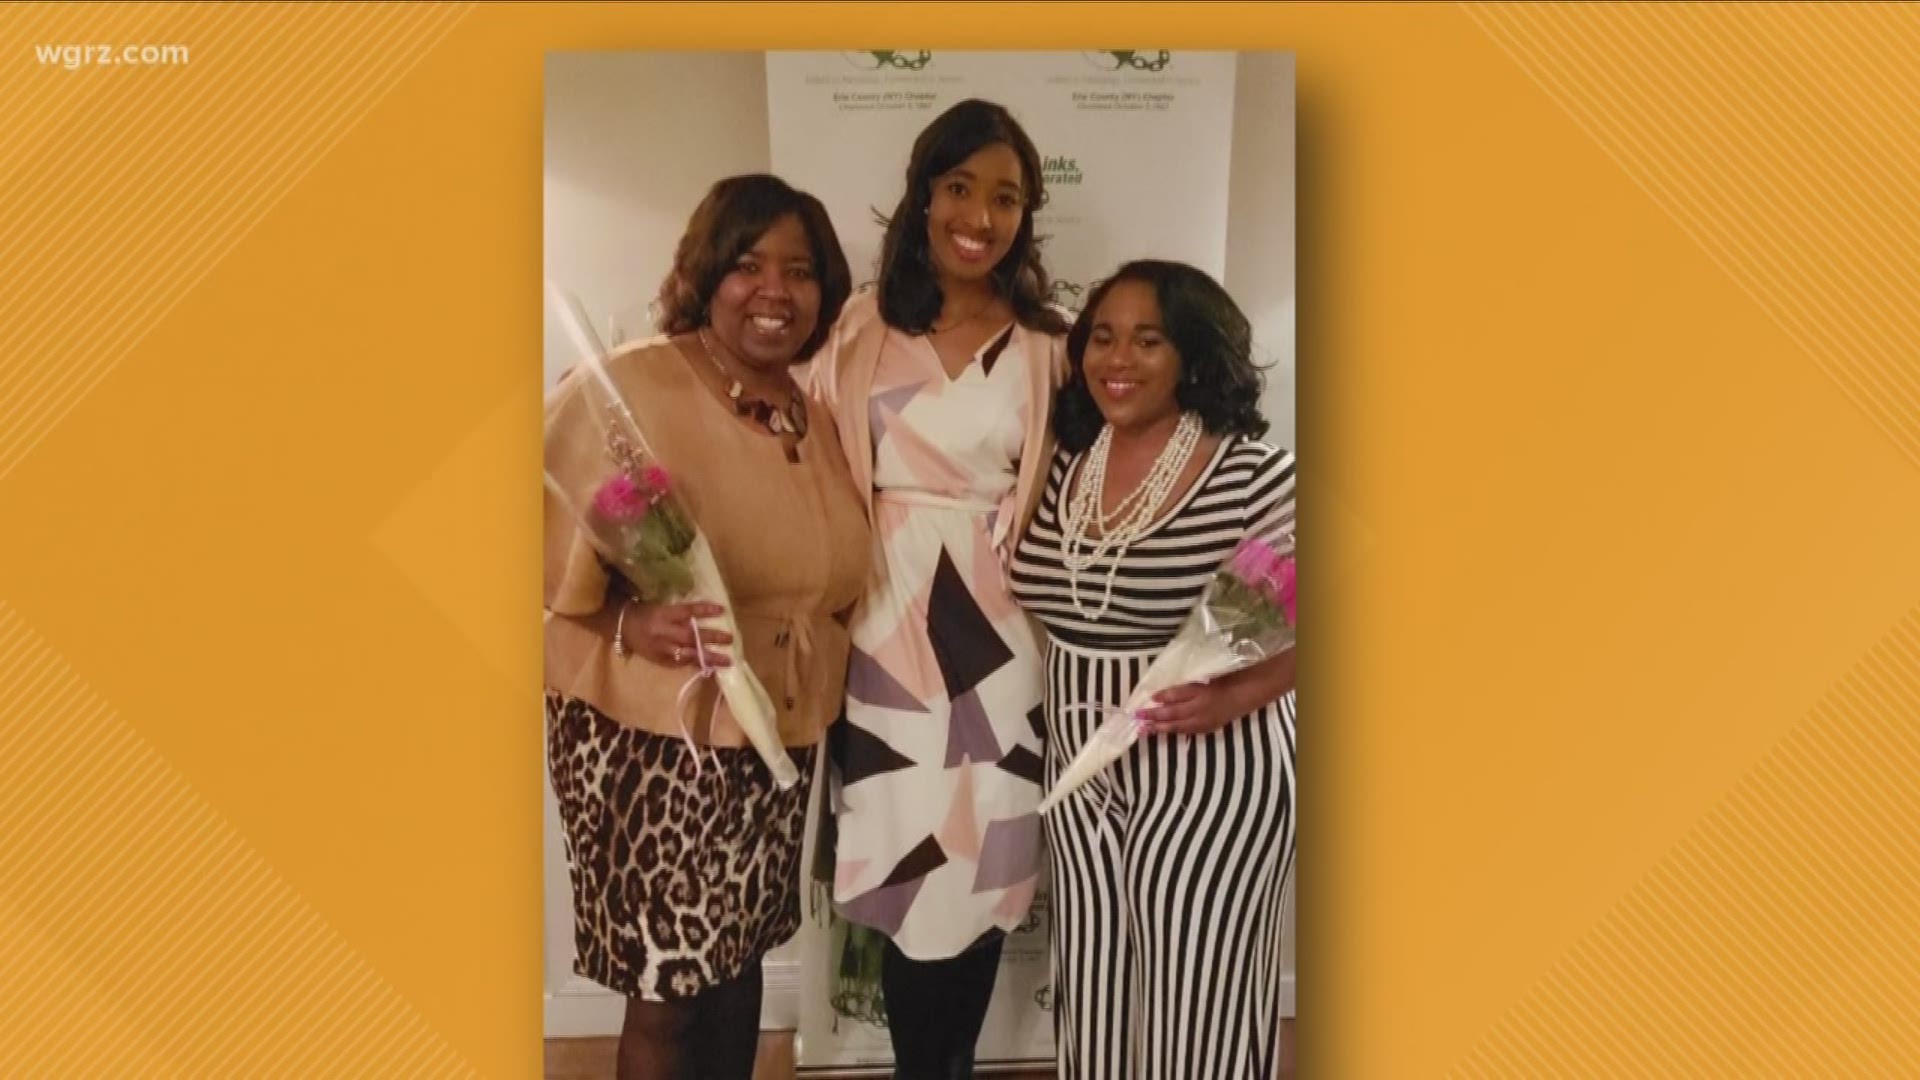 Three WGRZ staffers were recognized by The Links Inc. at its Makers of Change, Women of Color in Media program.